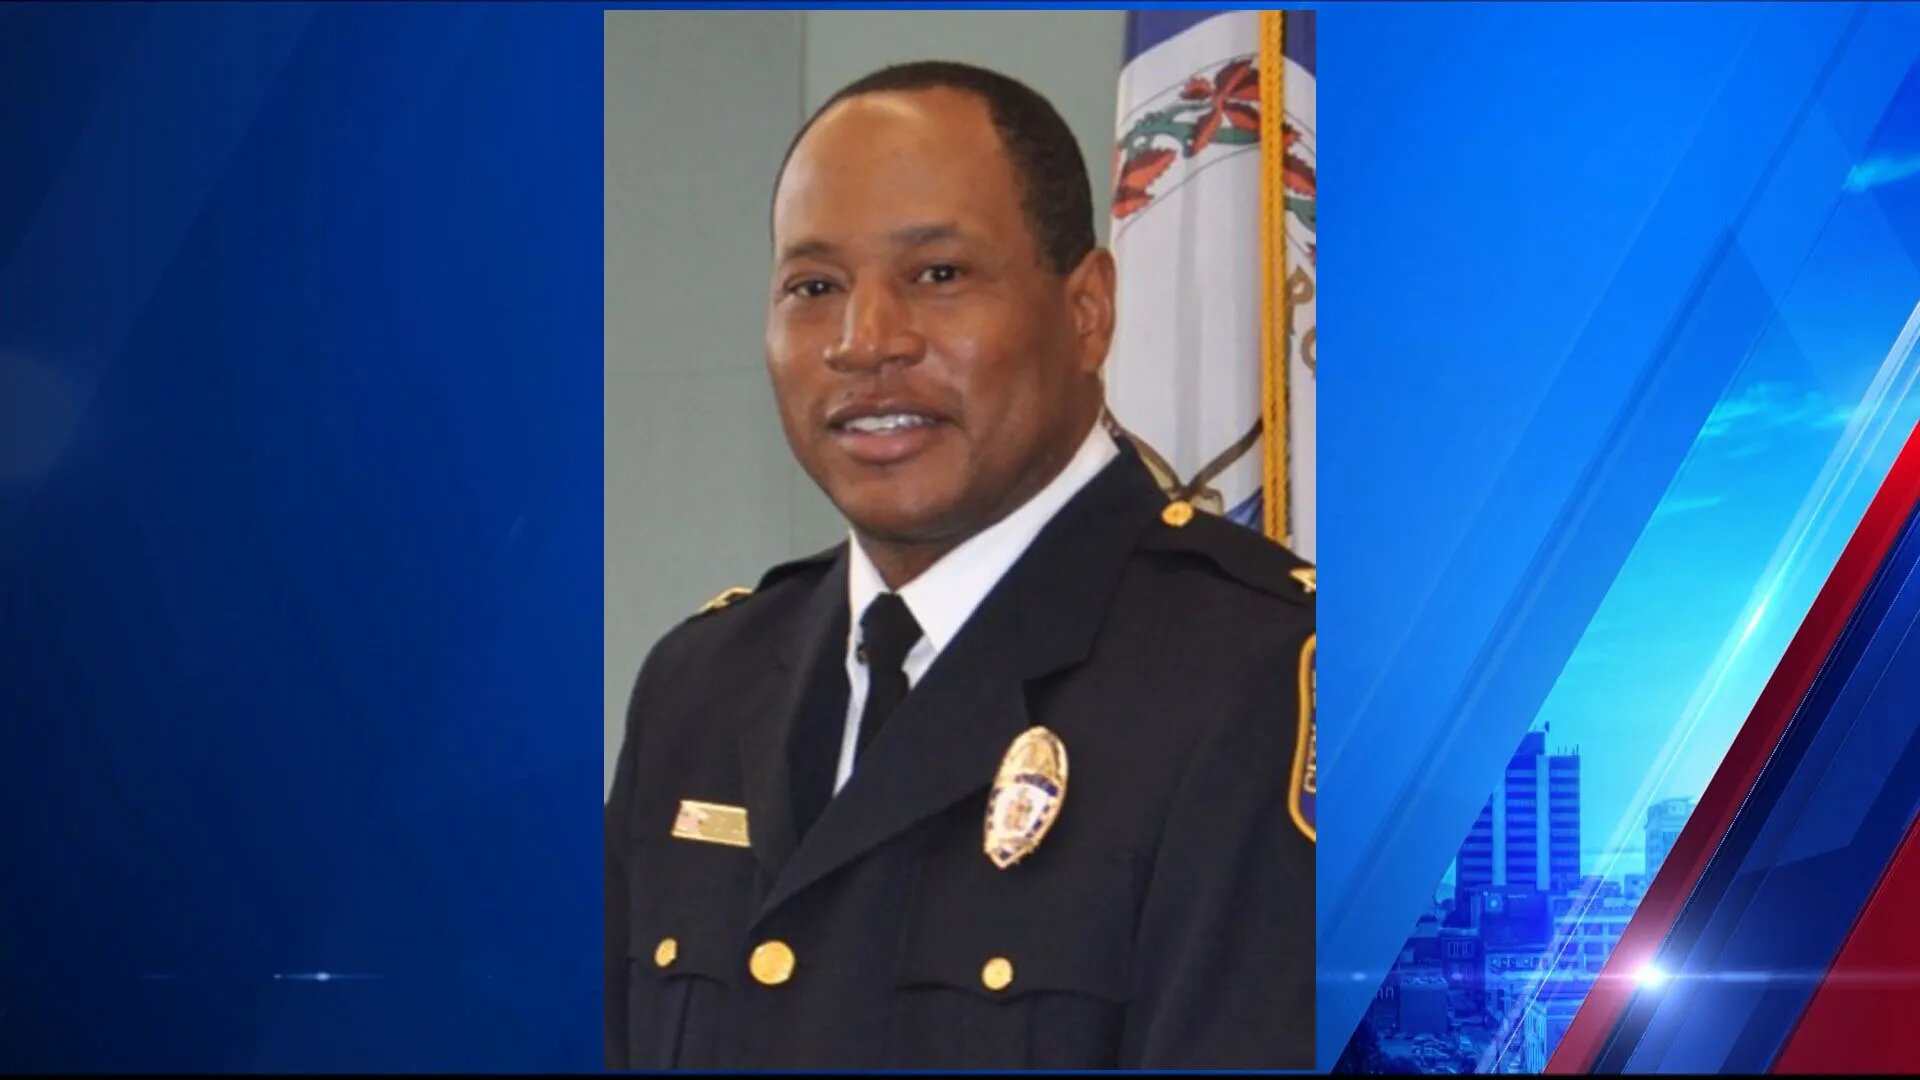 Keiser University Alum Appointed Chief of Police